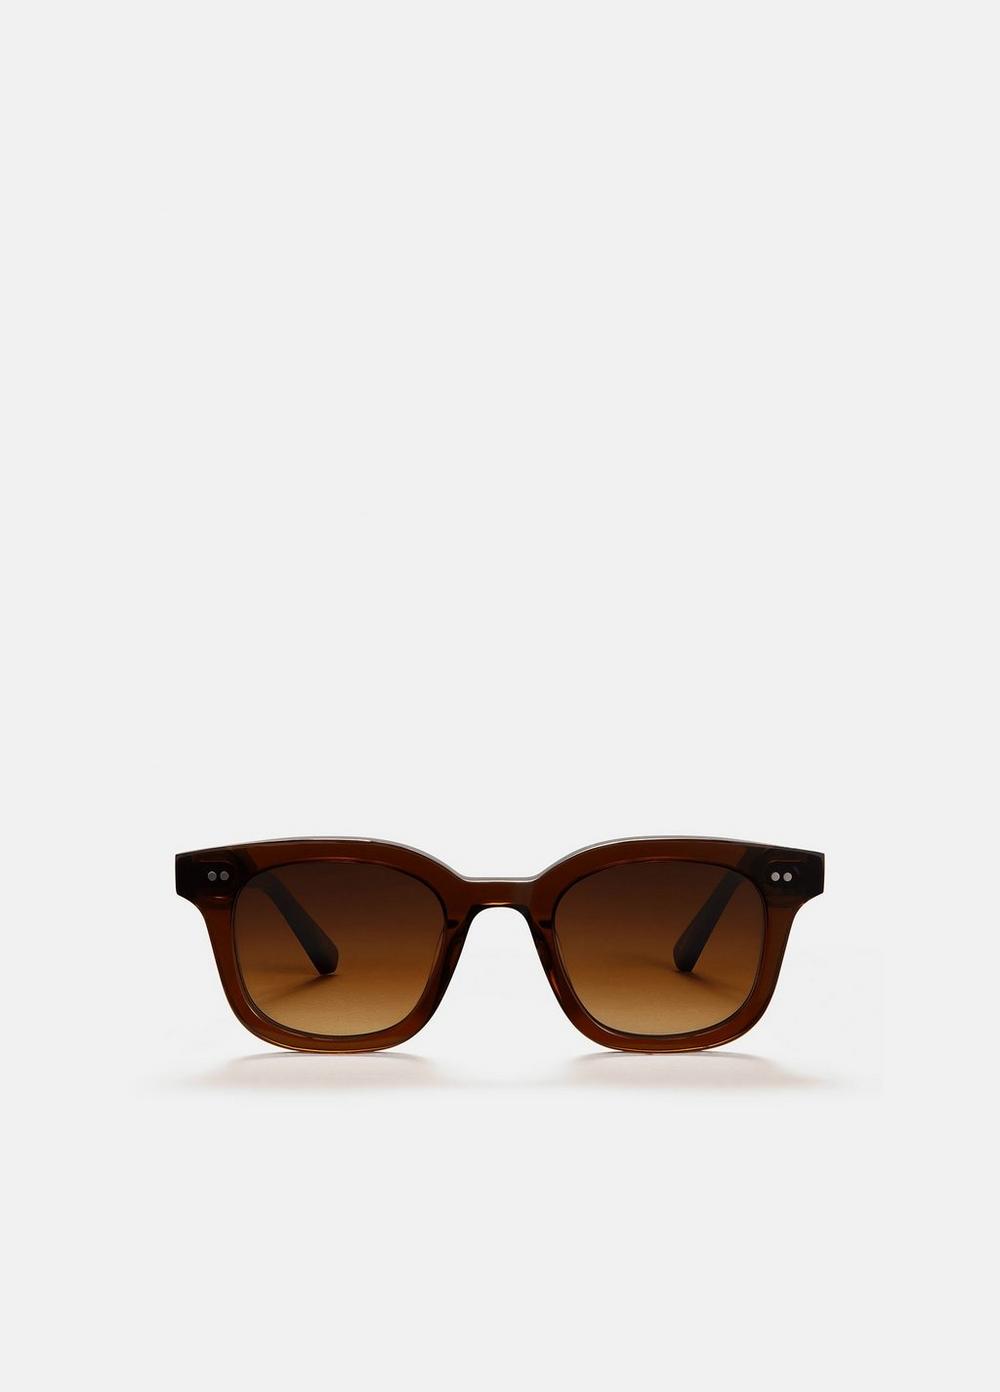 Chimi 02 Sunglasses, Brown Vince